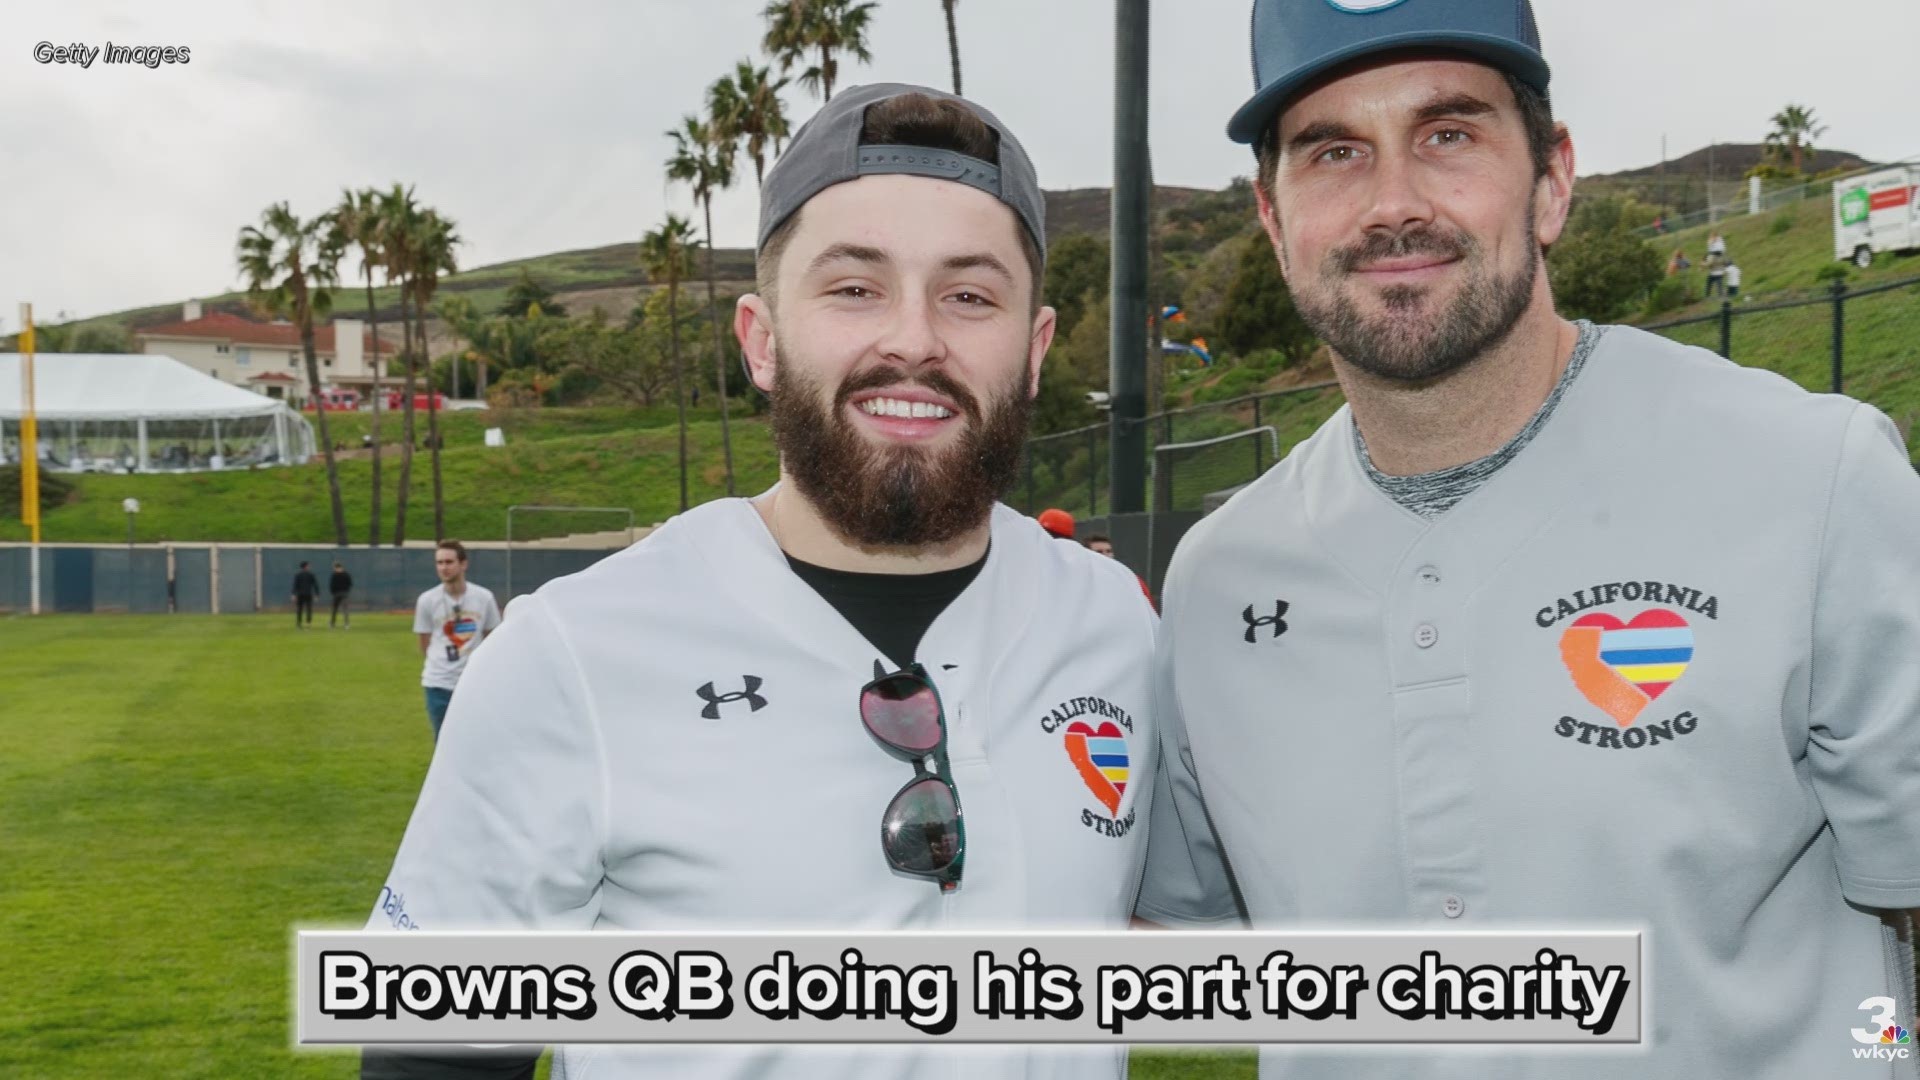 Despite taking good-natured ribbing for a batting practice swing, Cleveland Browns quarterback Baker Mayfield smacked an extra-base hit and scored a run in a charity softball game.